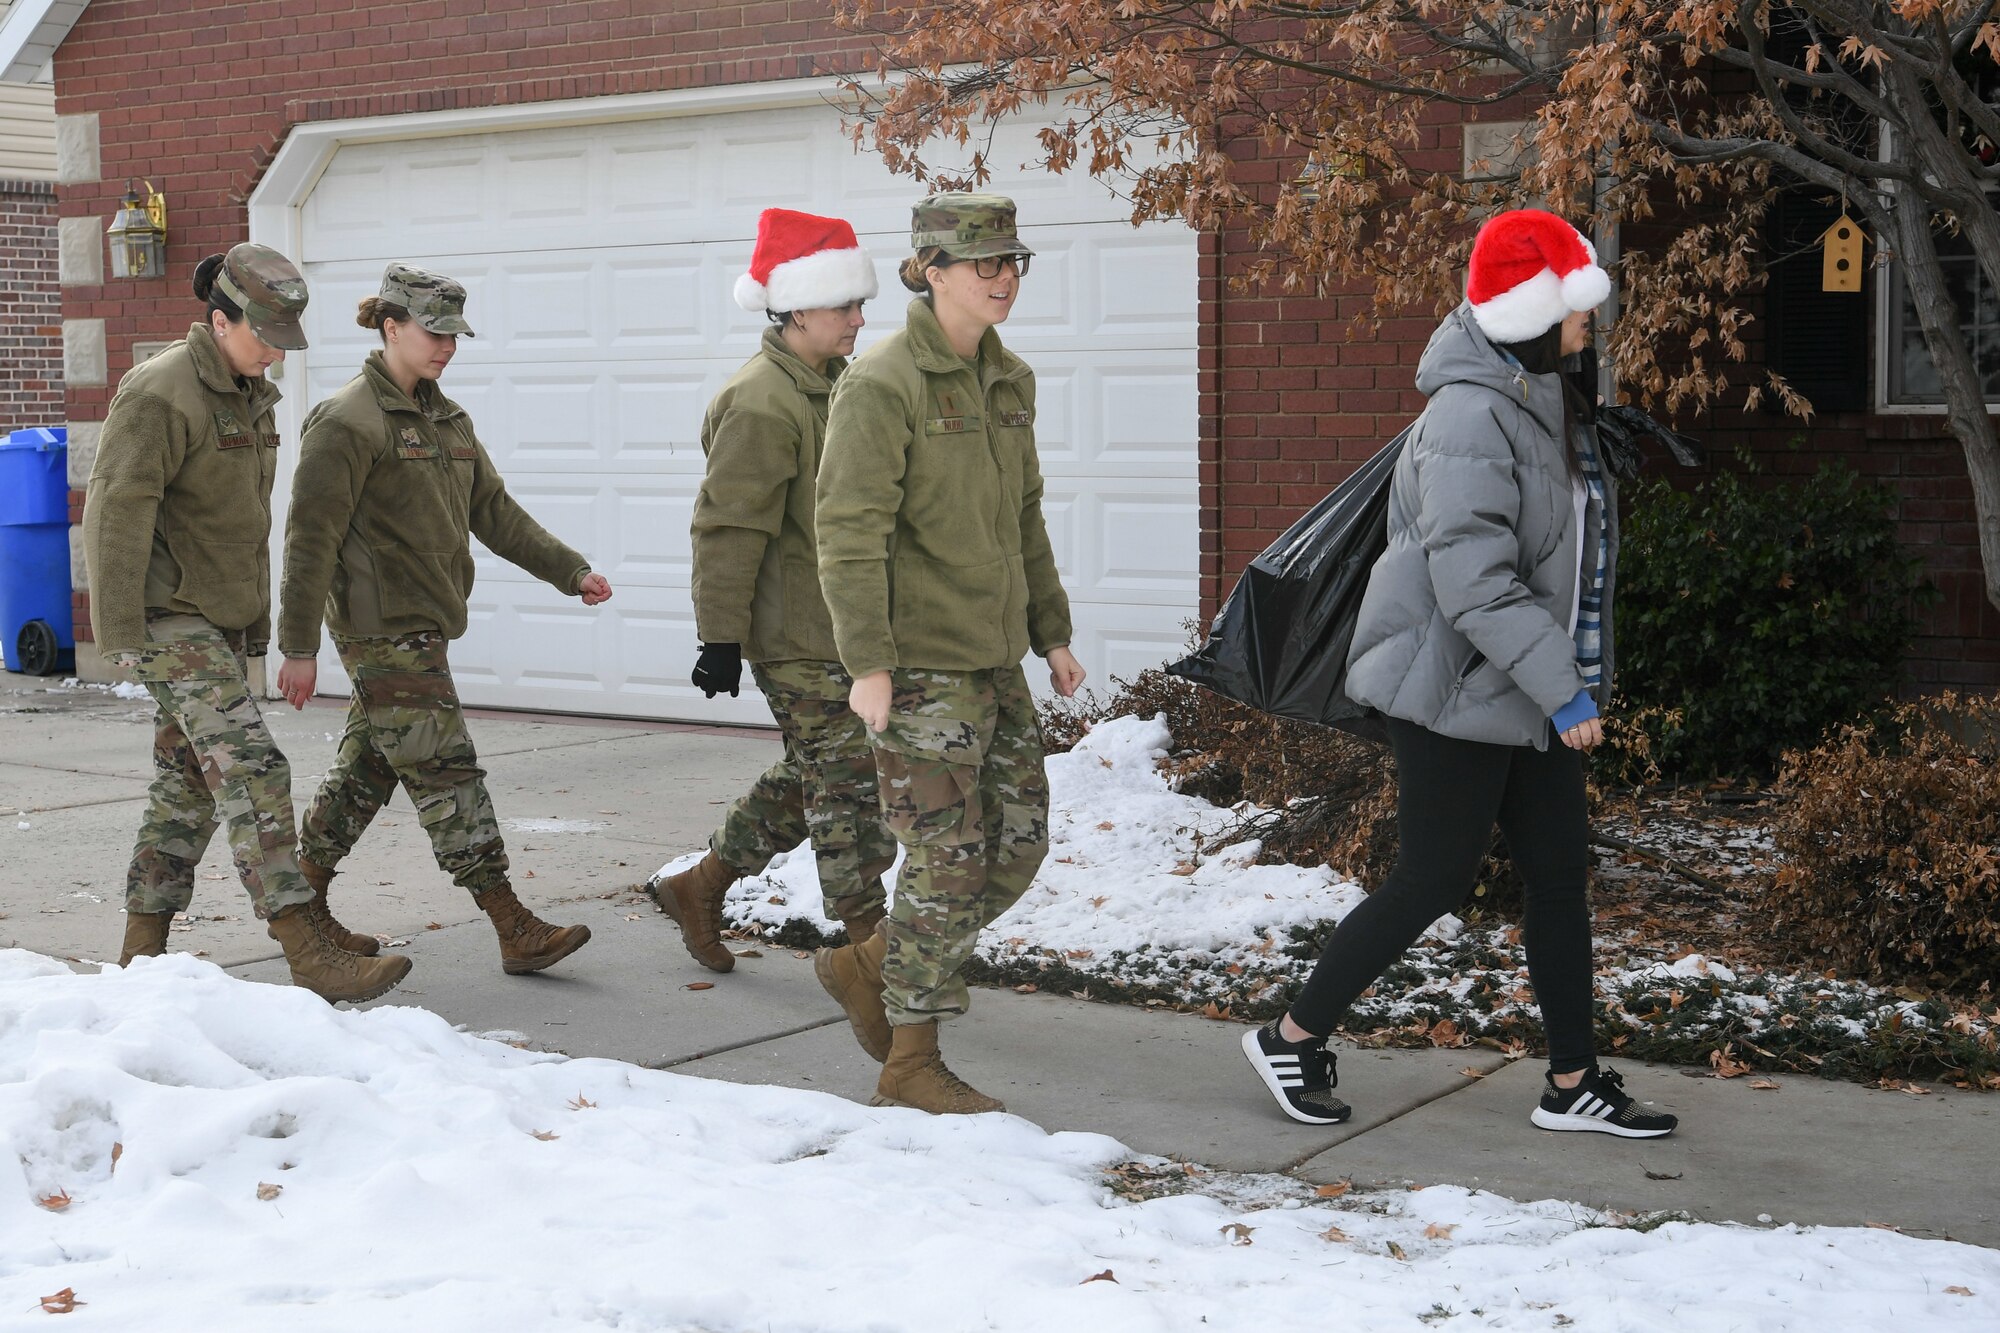 Airmen from Hill Air Force Base, Utah, deliver a bag of wrapped gifts to foster children Dec. 18, 2019, as part of a volunteer effort called Santa Brigade, a joint venture with Utah Foster Care Foundation.  Around 85 Airmen from various commands played Santa for the day delivering 537 gifts to over 140 foster care families around Northern Utah. (U.S. Air Force photo by Cynthia Griggs)